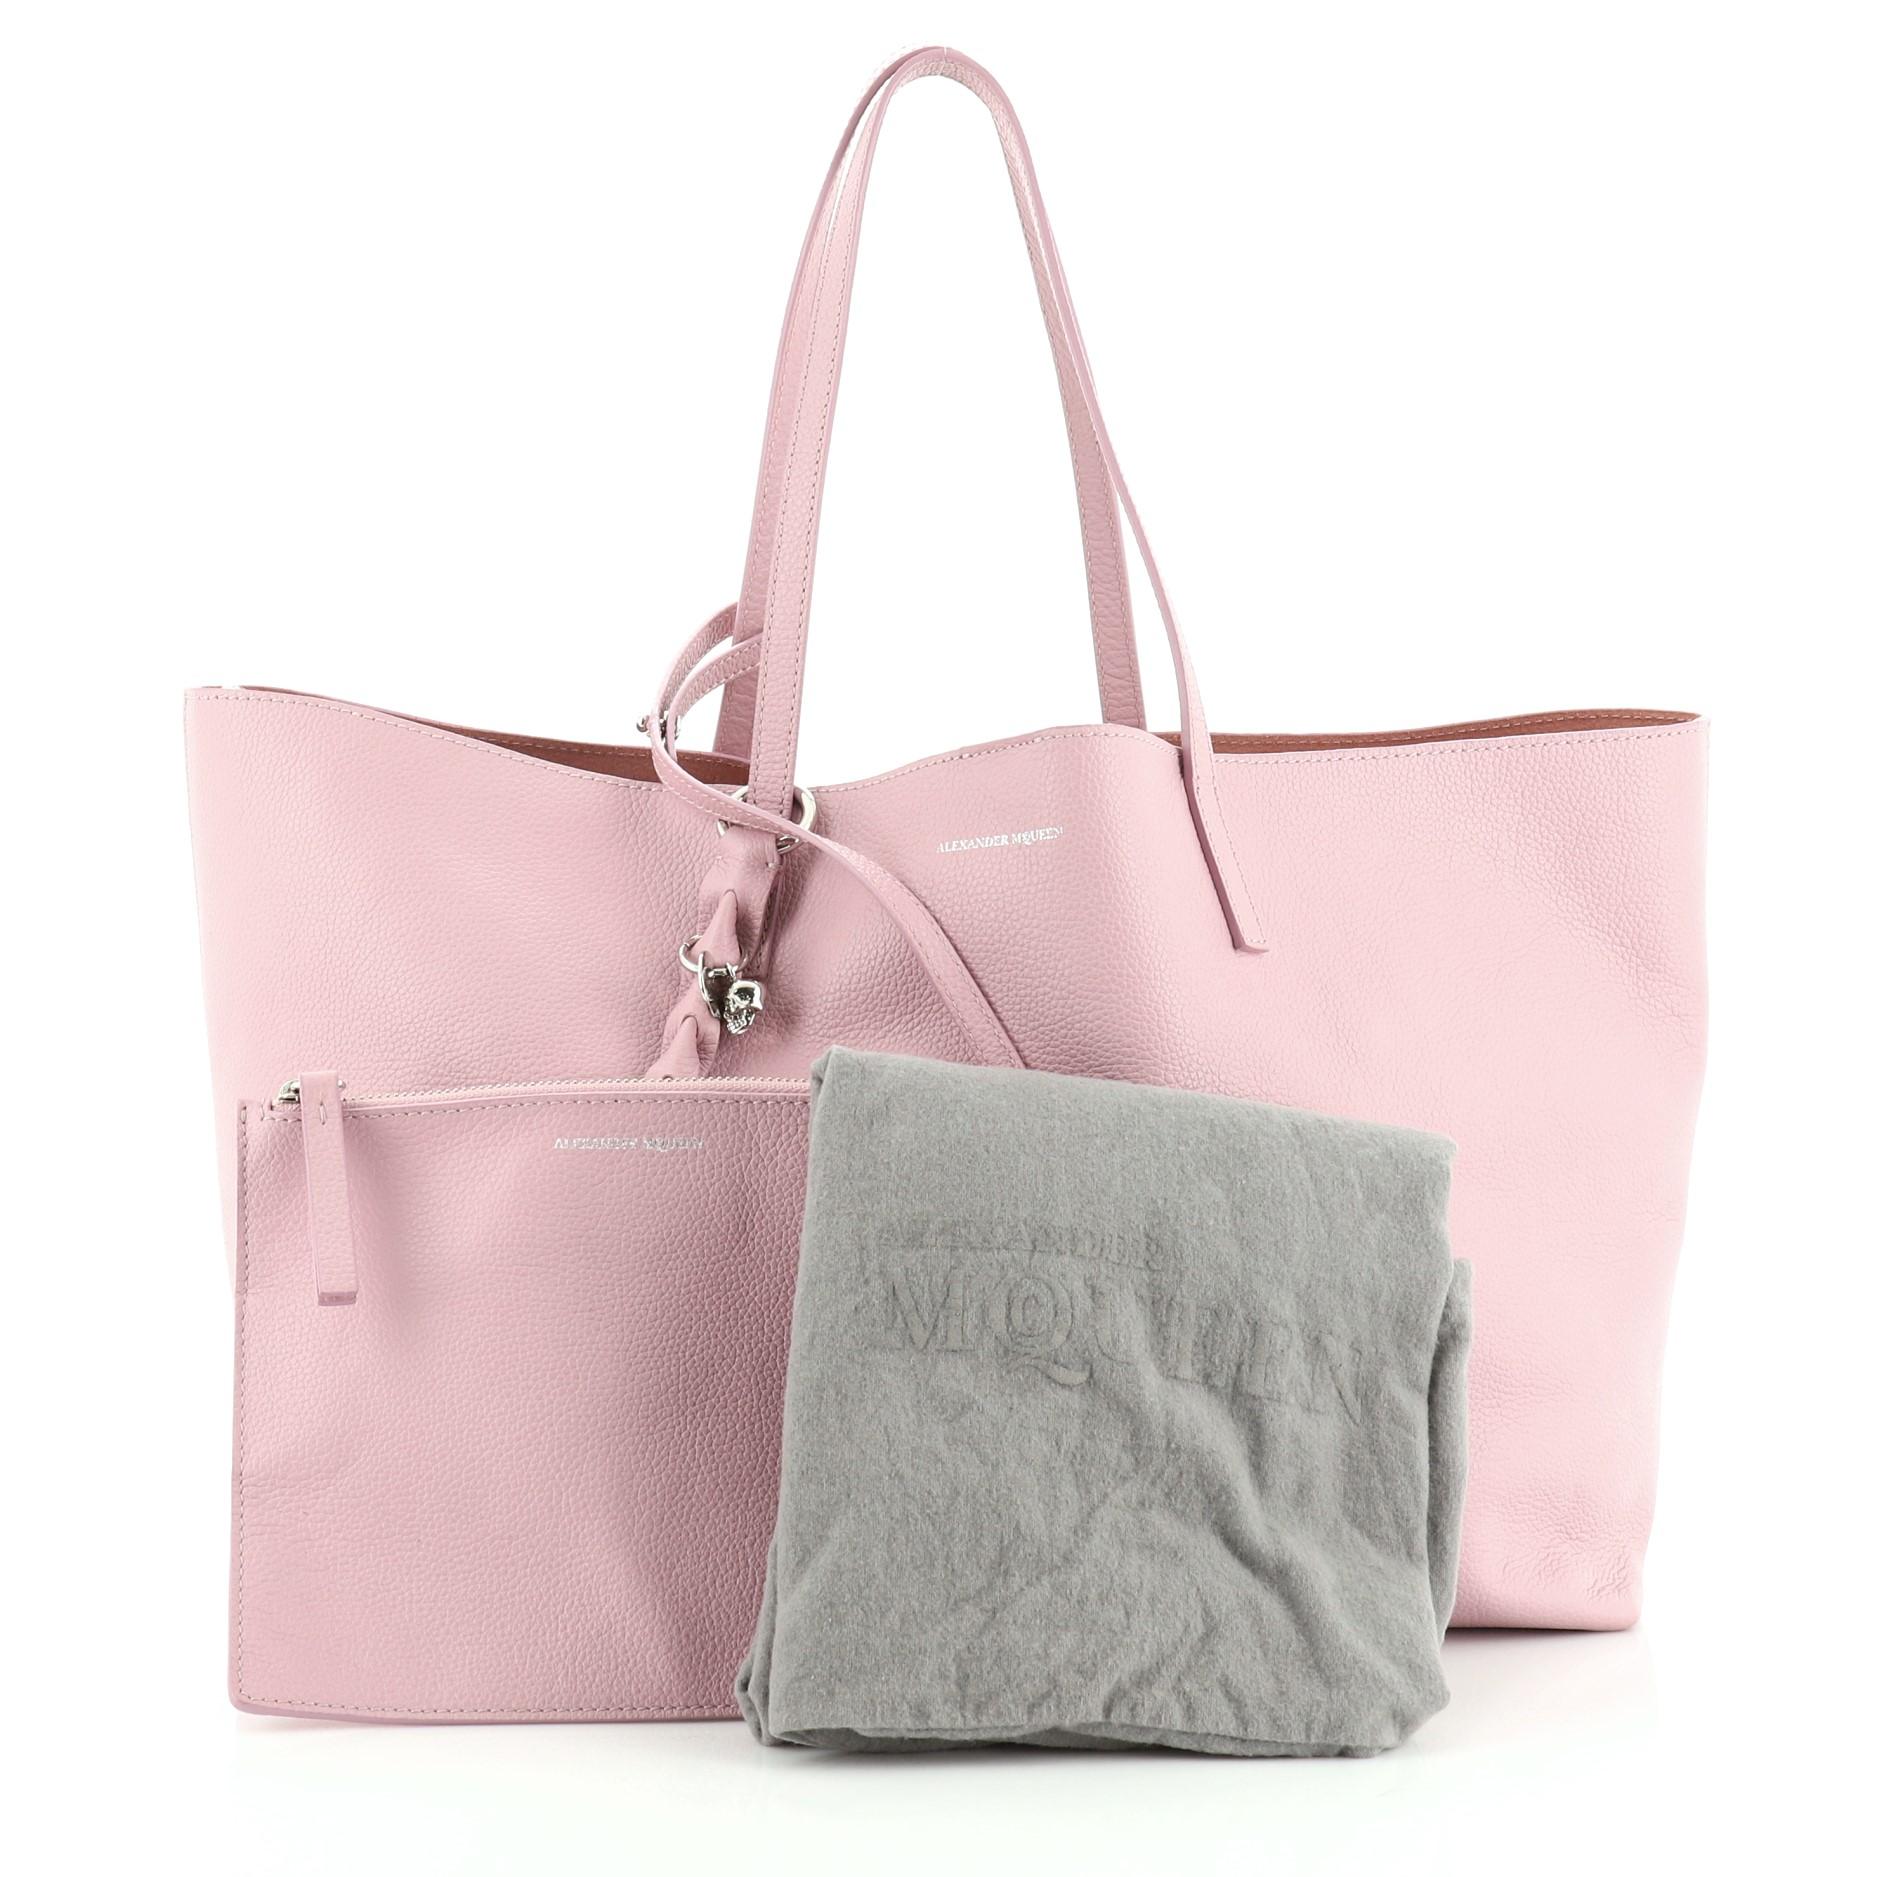 This Alexander McQueen Skull Open Shopper Tote Leather Large, crafted in pink leather, features dual flat leather handles, signature silver skull padlock, and silver-tone hardware. Its wide-open top opens to a pink suede interior. 

Estimated Retail